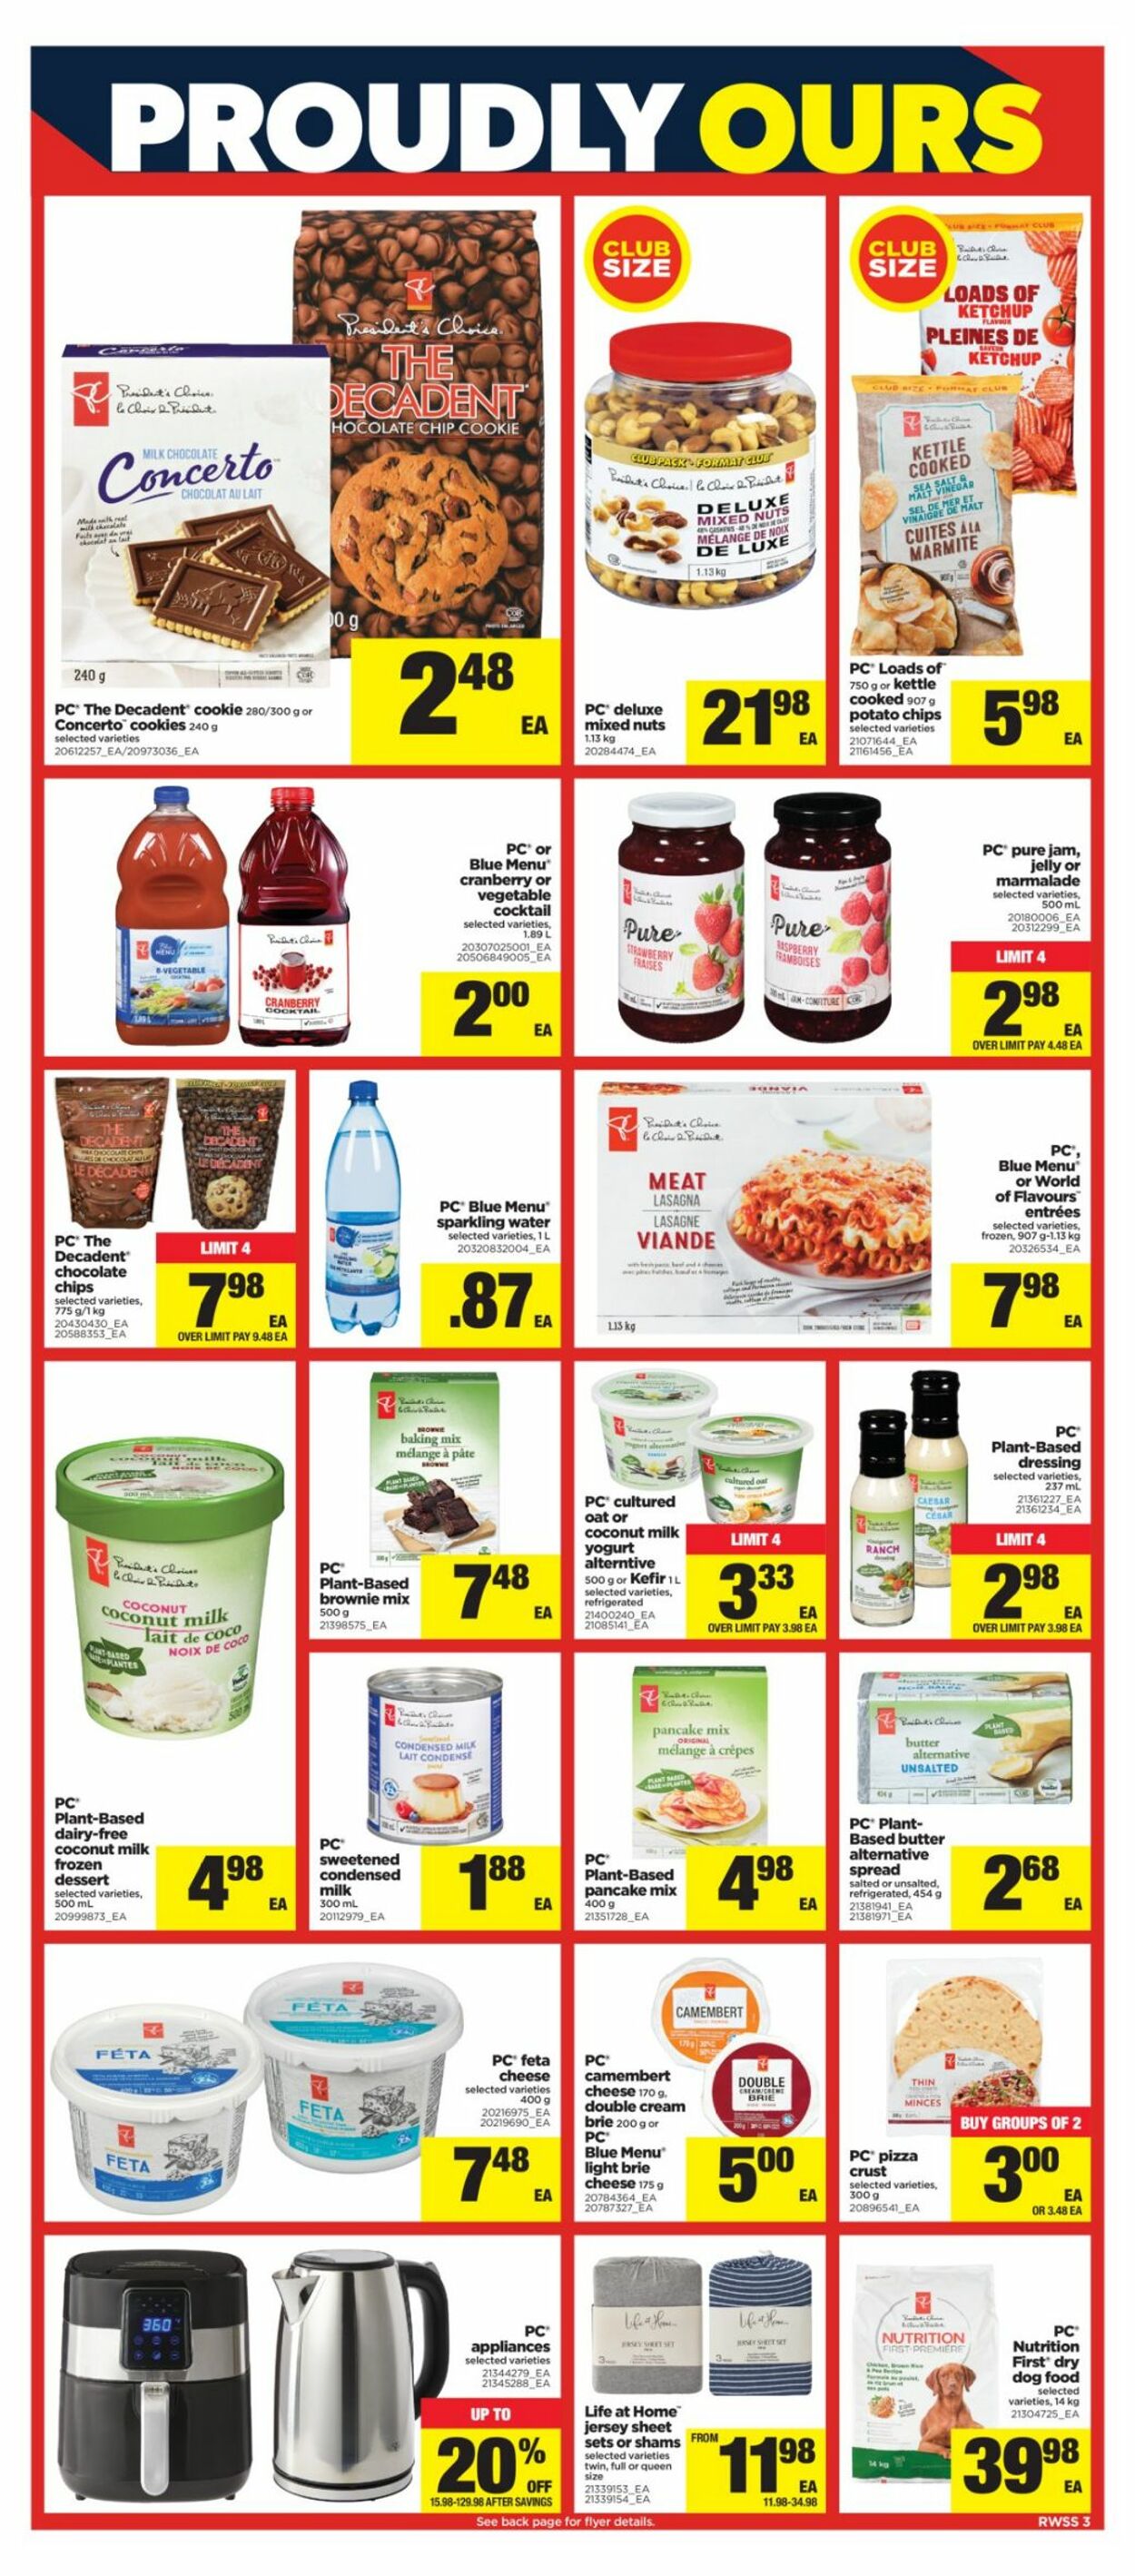 Flyer Real Canadian Superstore 17.09.2021 - 23.09.2021